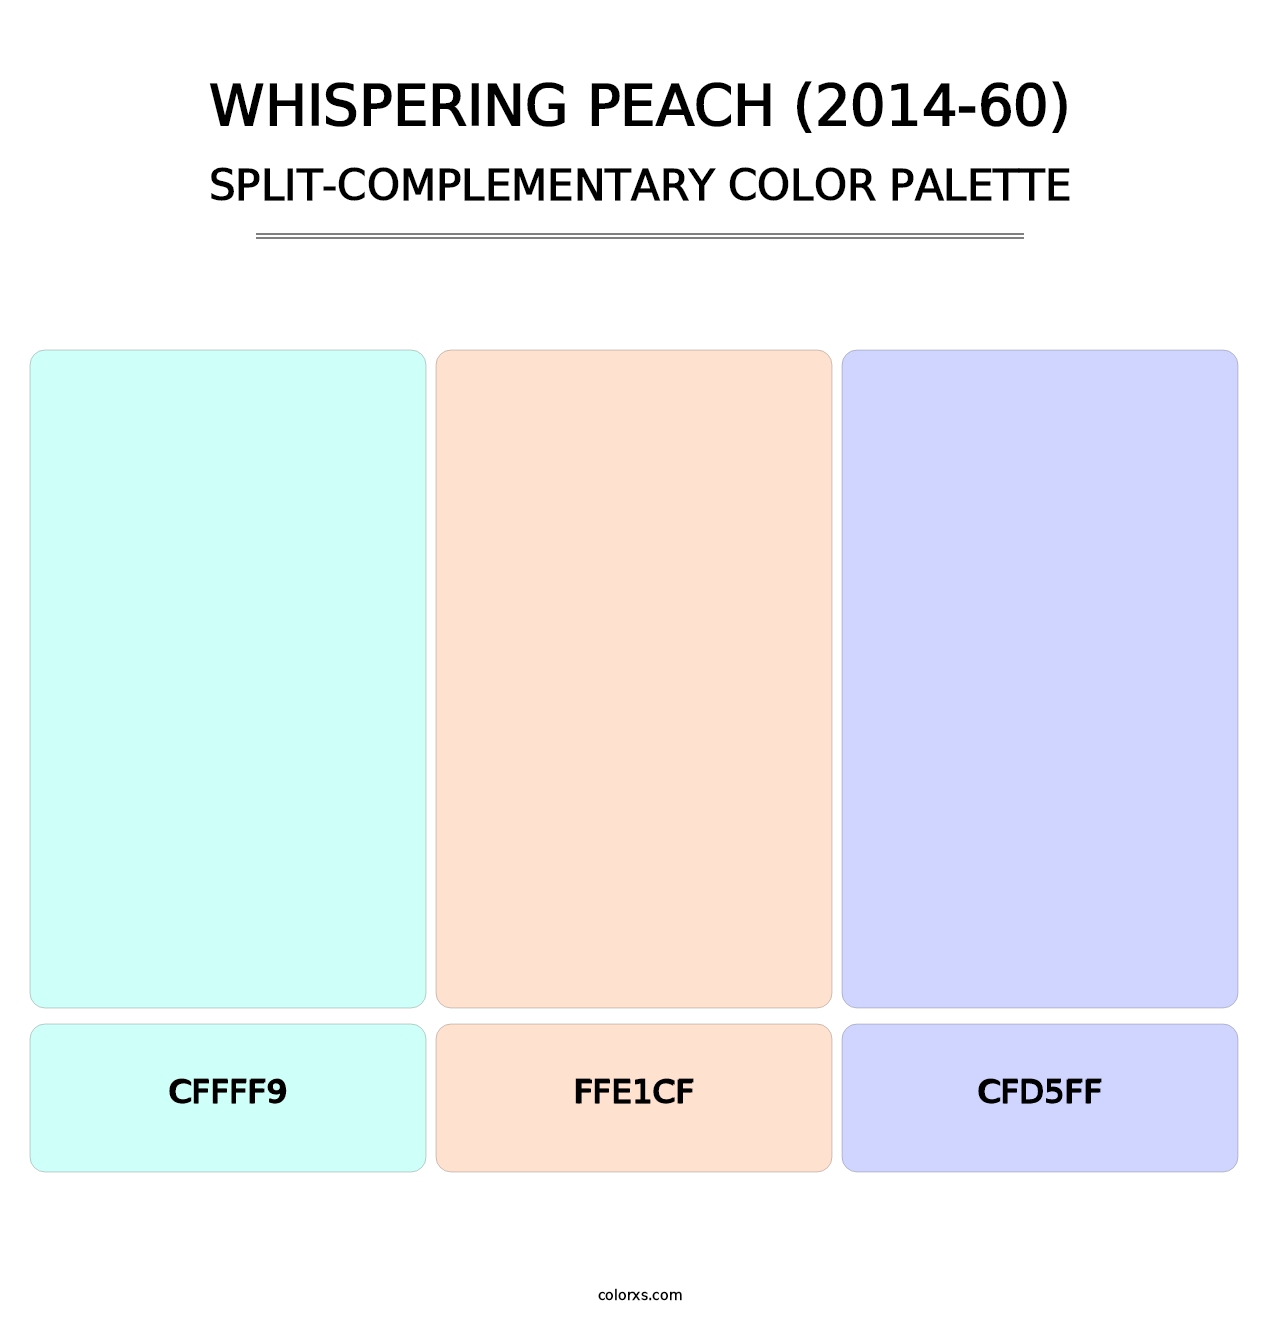 Whispering Peach (2014-60) - Split-Complementary Color Palette